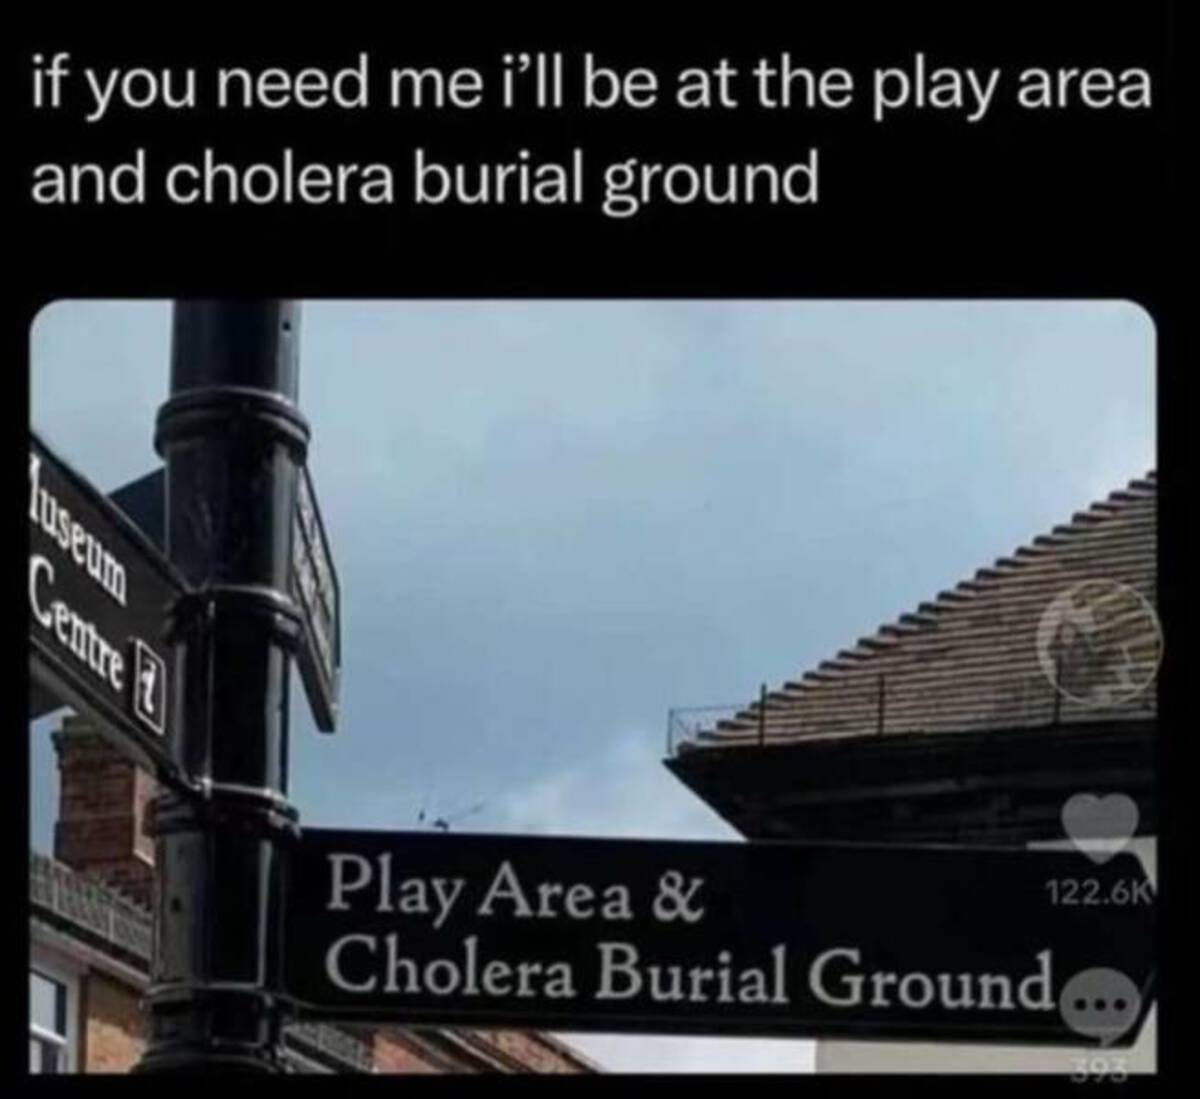 Meme - if you need me i'll be at the play area and cholera burial ground Luseum Centre Play Area & Cholera Burial Ground 393